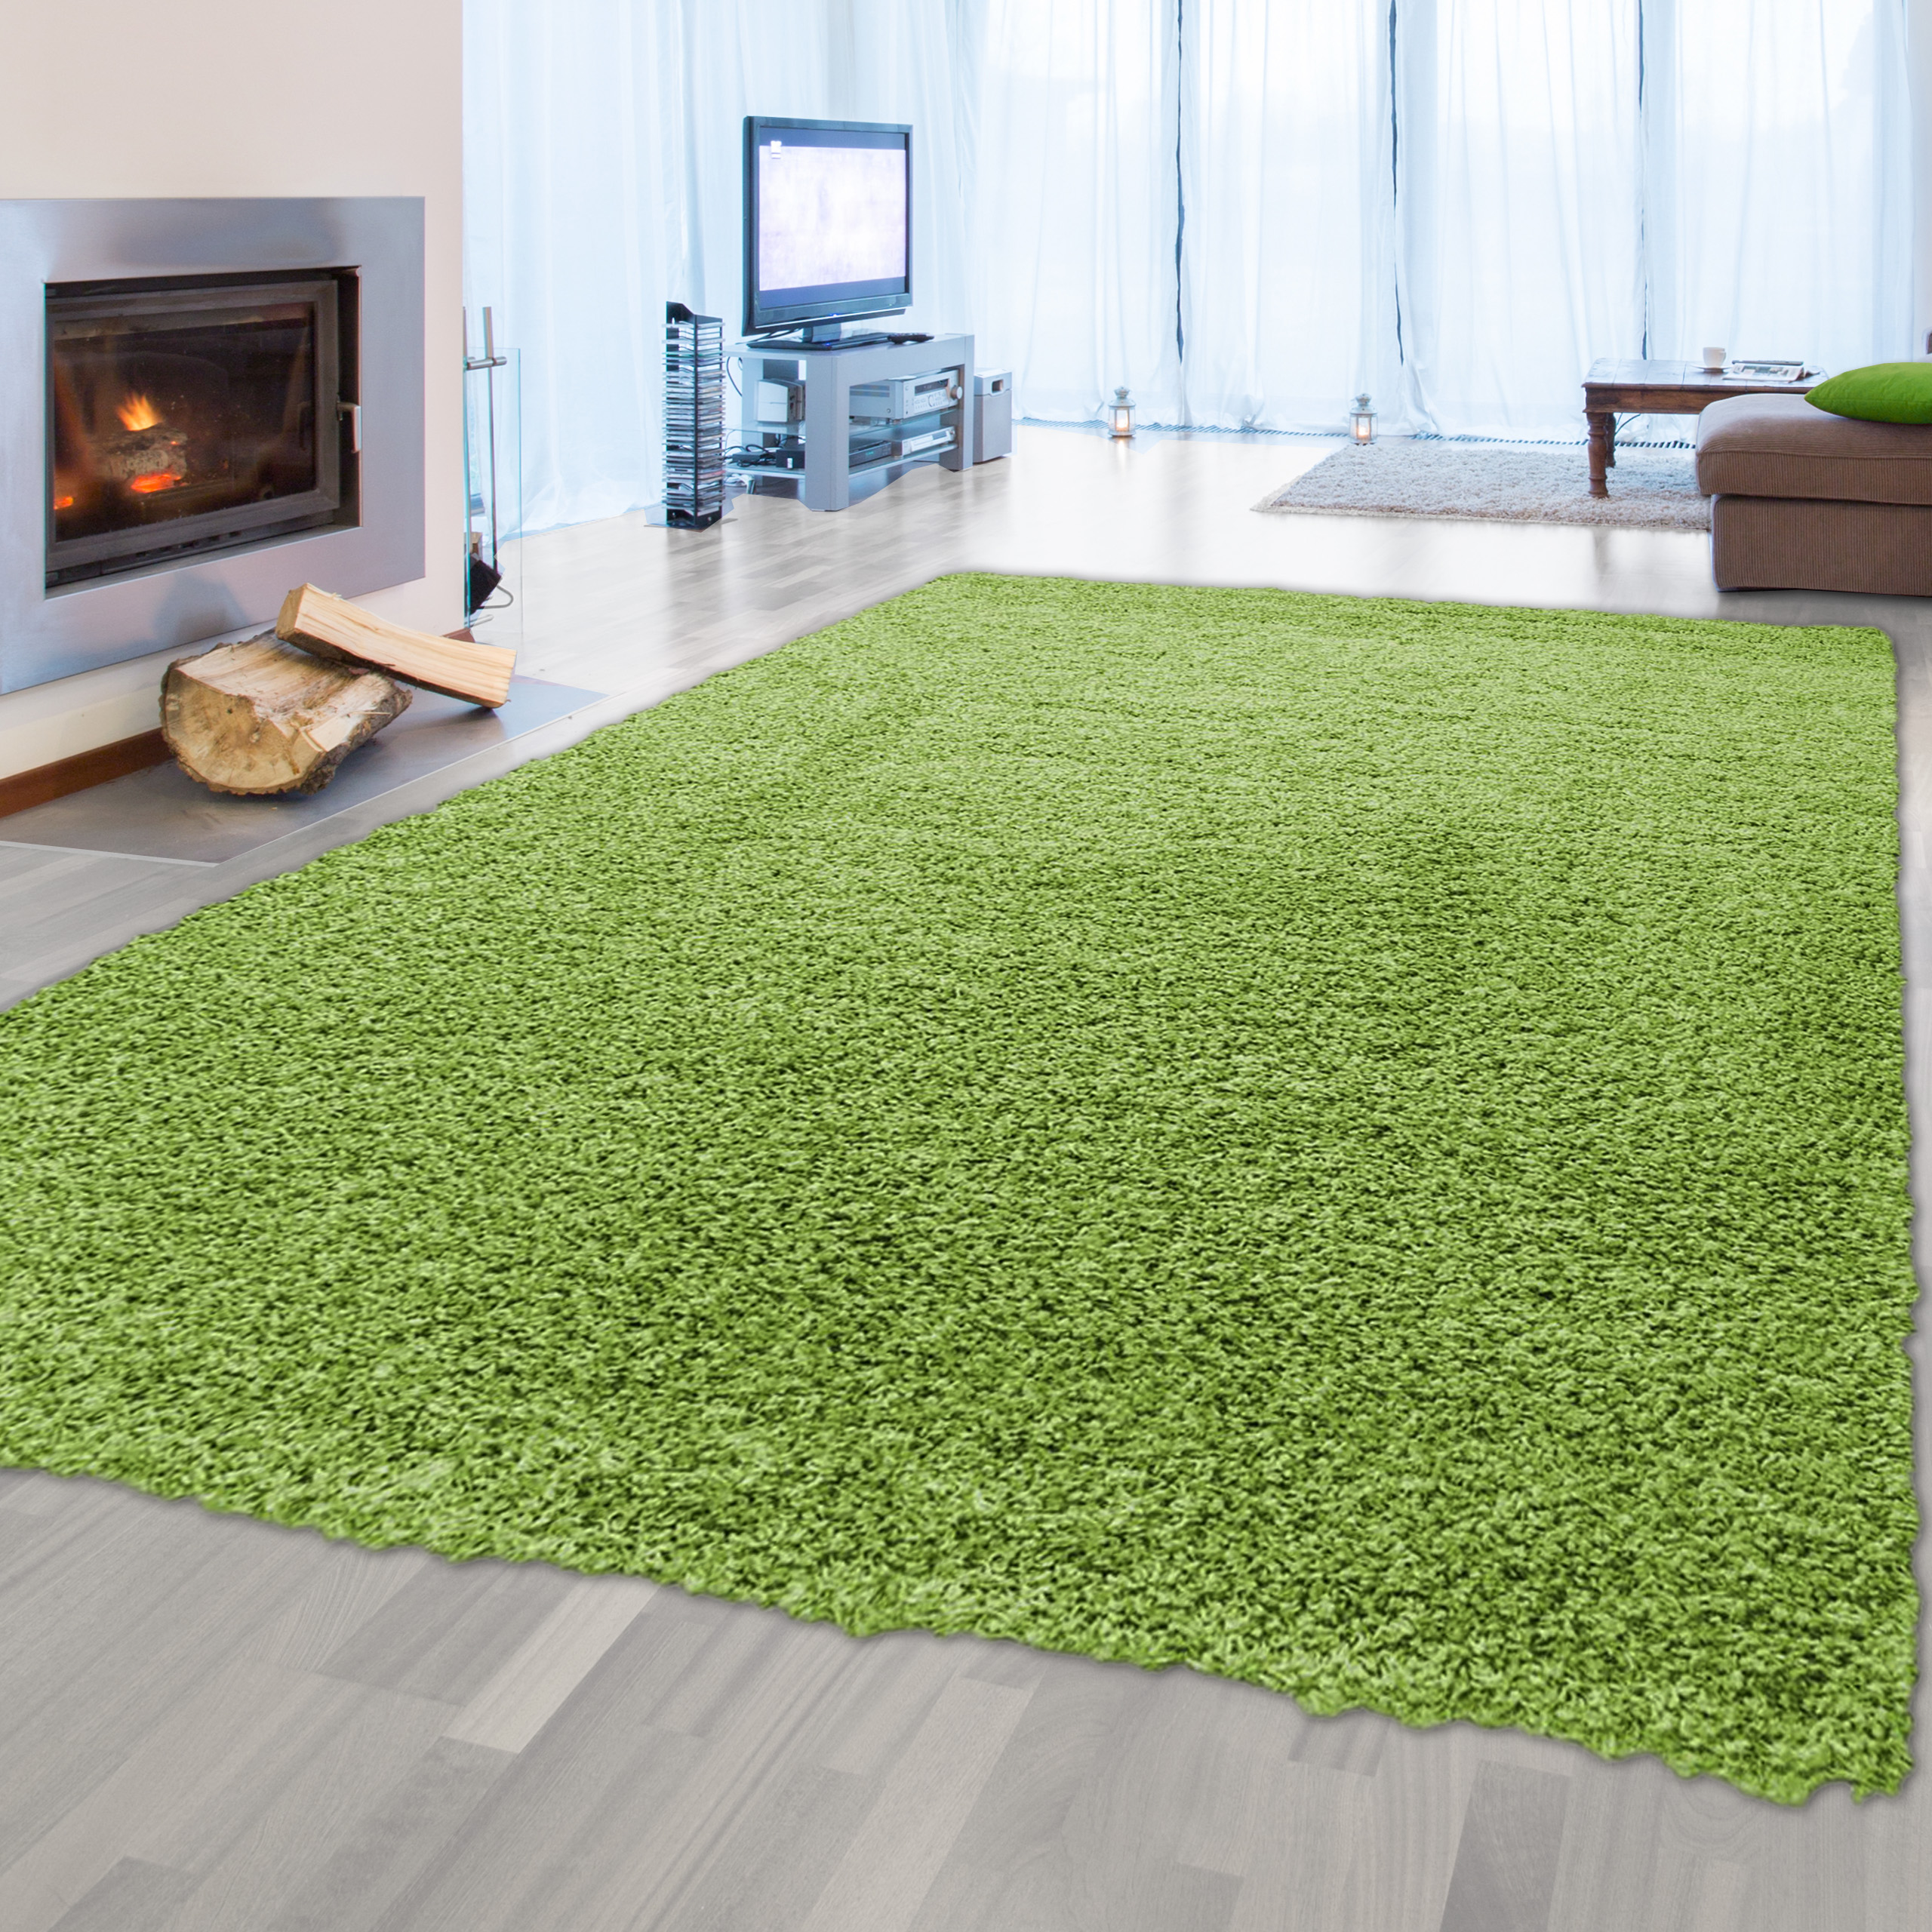 Shag carpet emission free 2.2 (approx) polypropylenes / height Merilon weight 100% Total 30mm gr overall (approx) - frisee, m² Teppich-Traum